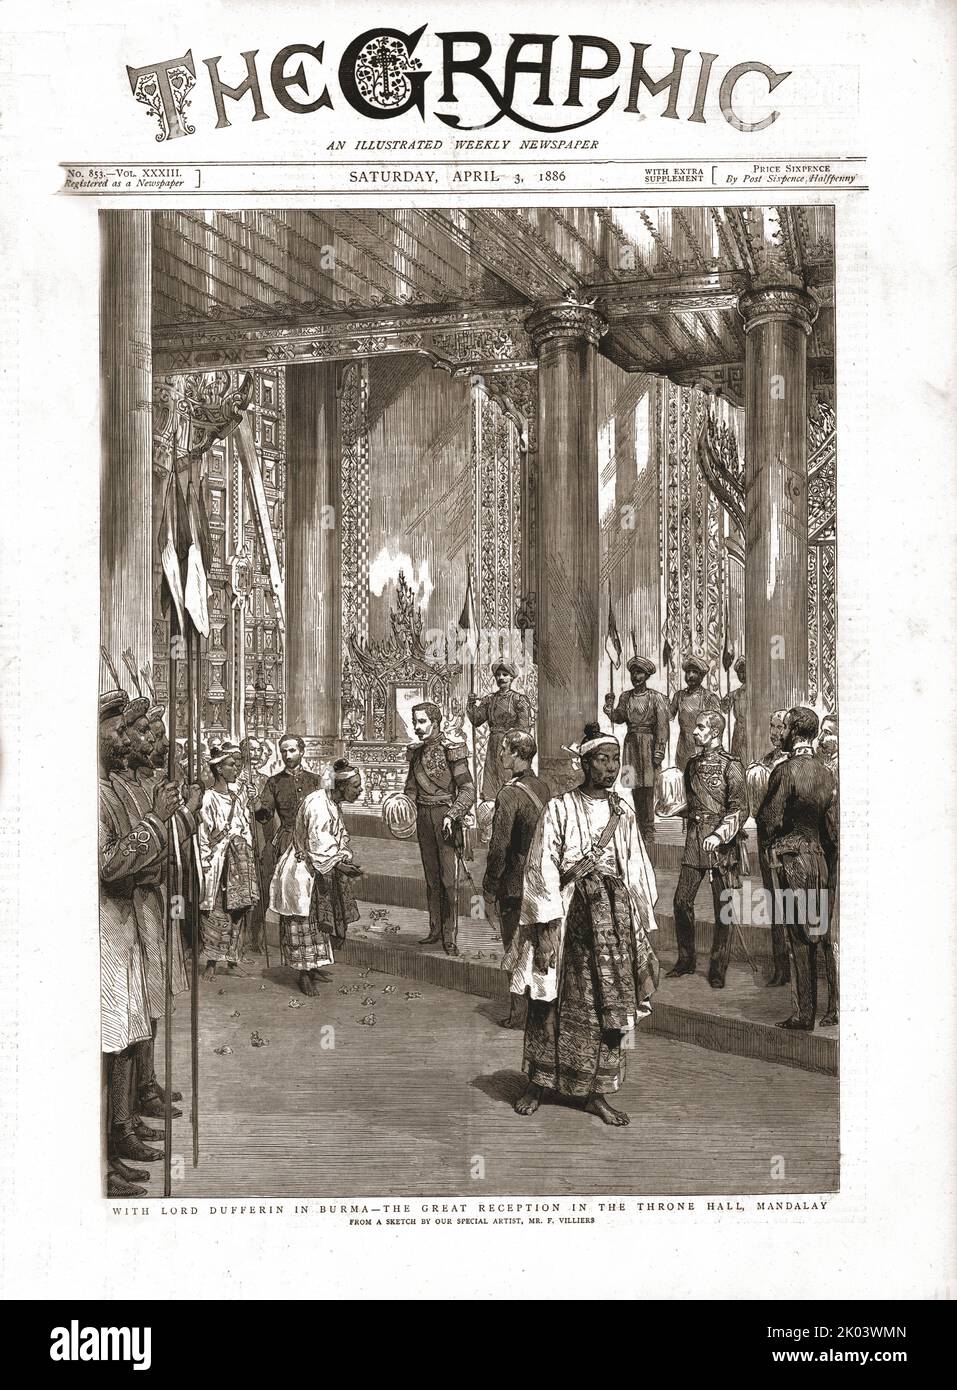 'The Graphic, Front Cover April 3. 1886', 1886. With Lord Dufferin in Burma - the great reception at the throne hall, Mandalay. From &quot;The Graphic. An Illustrated Weekly Newspaper Volume 33. January to June, 1886&quot;. Stock Photo